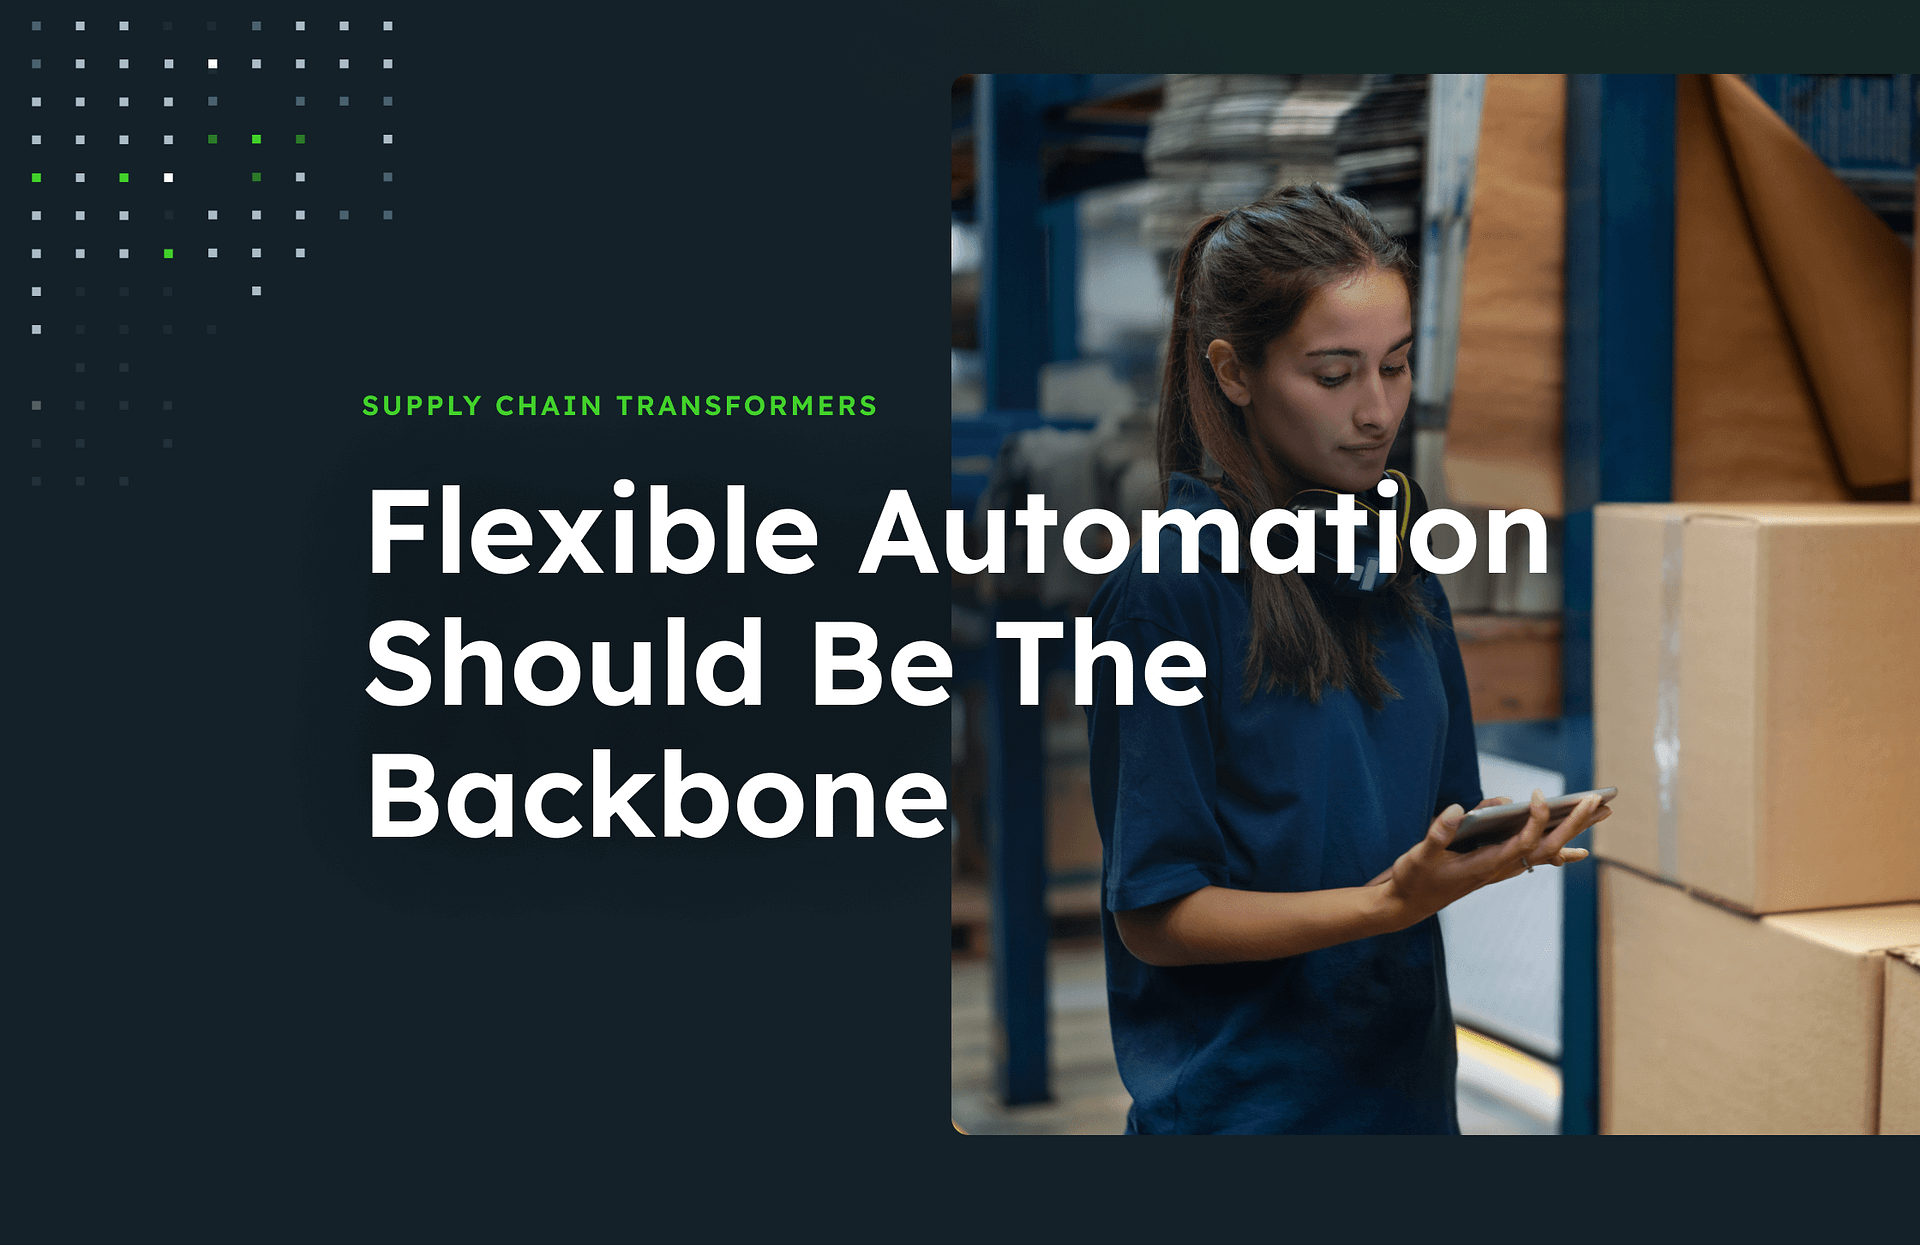 Flexible automation should be the backbone text on a half dark background and an image of a woman next to cardboard boxes